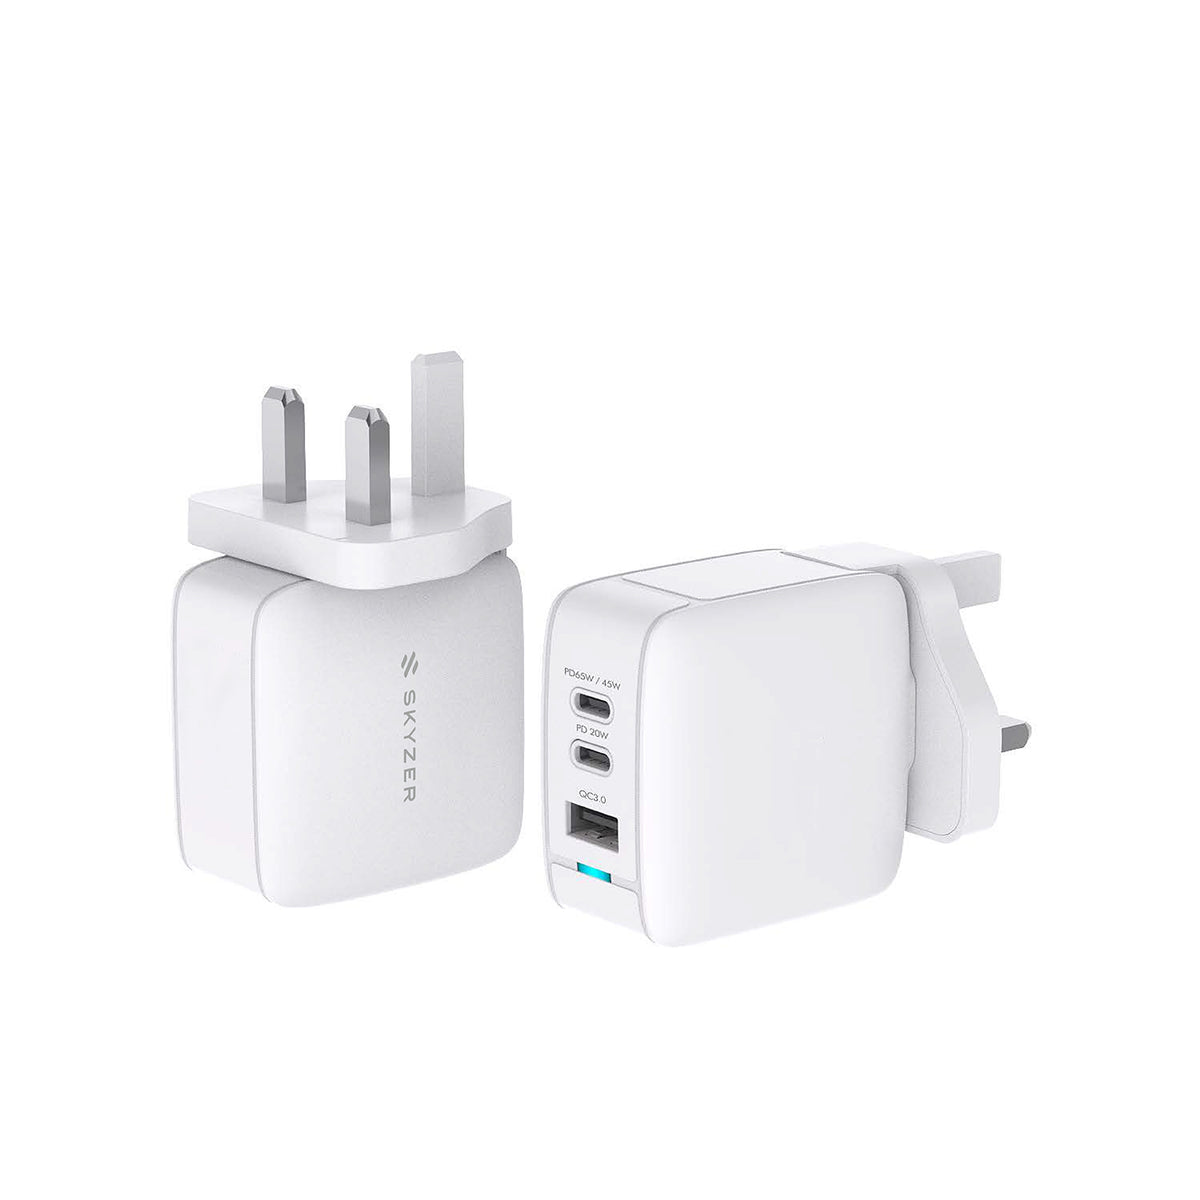 Skyzer PD158 SpeedPro 65W Max Fast Charging Wall Charger with 2 USB-C + 1 USB-A Port